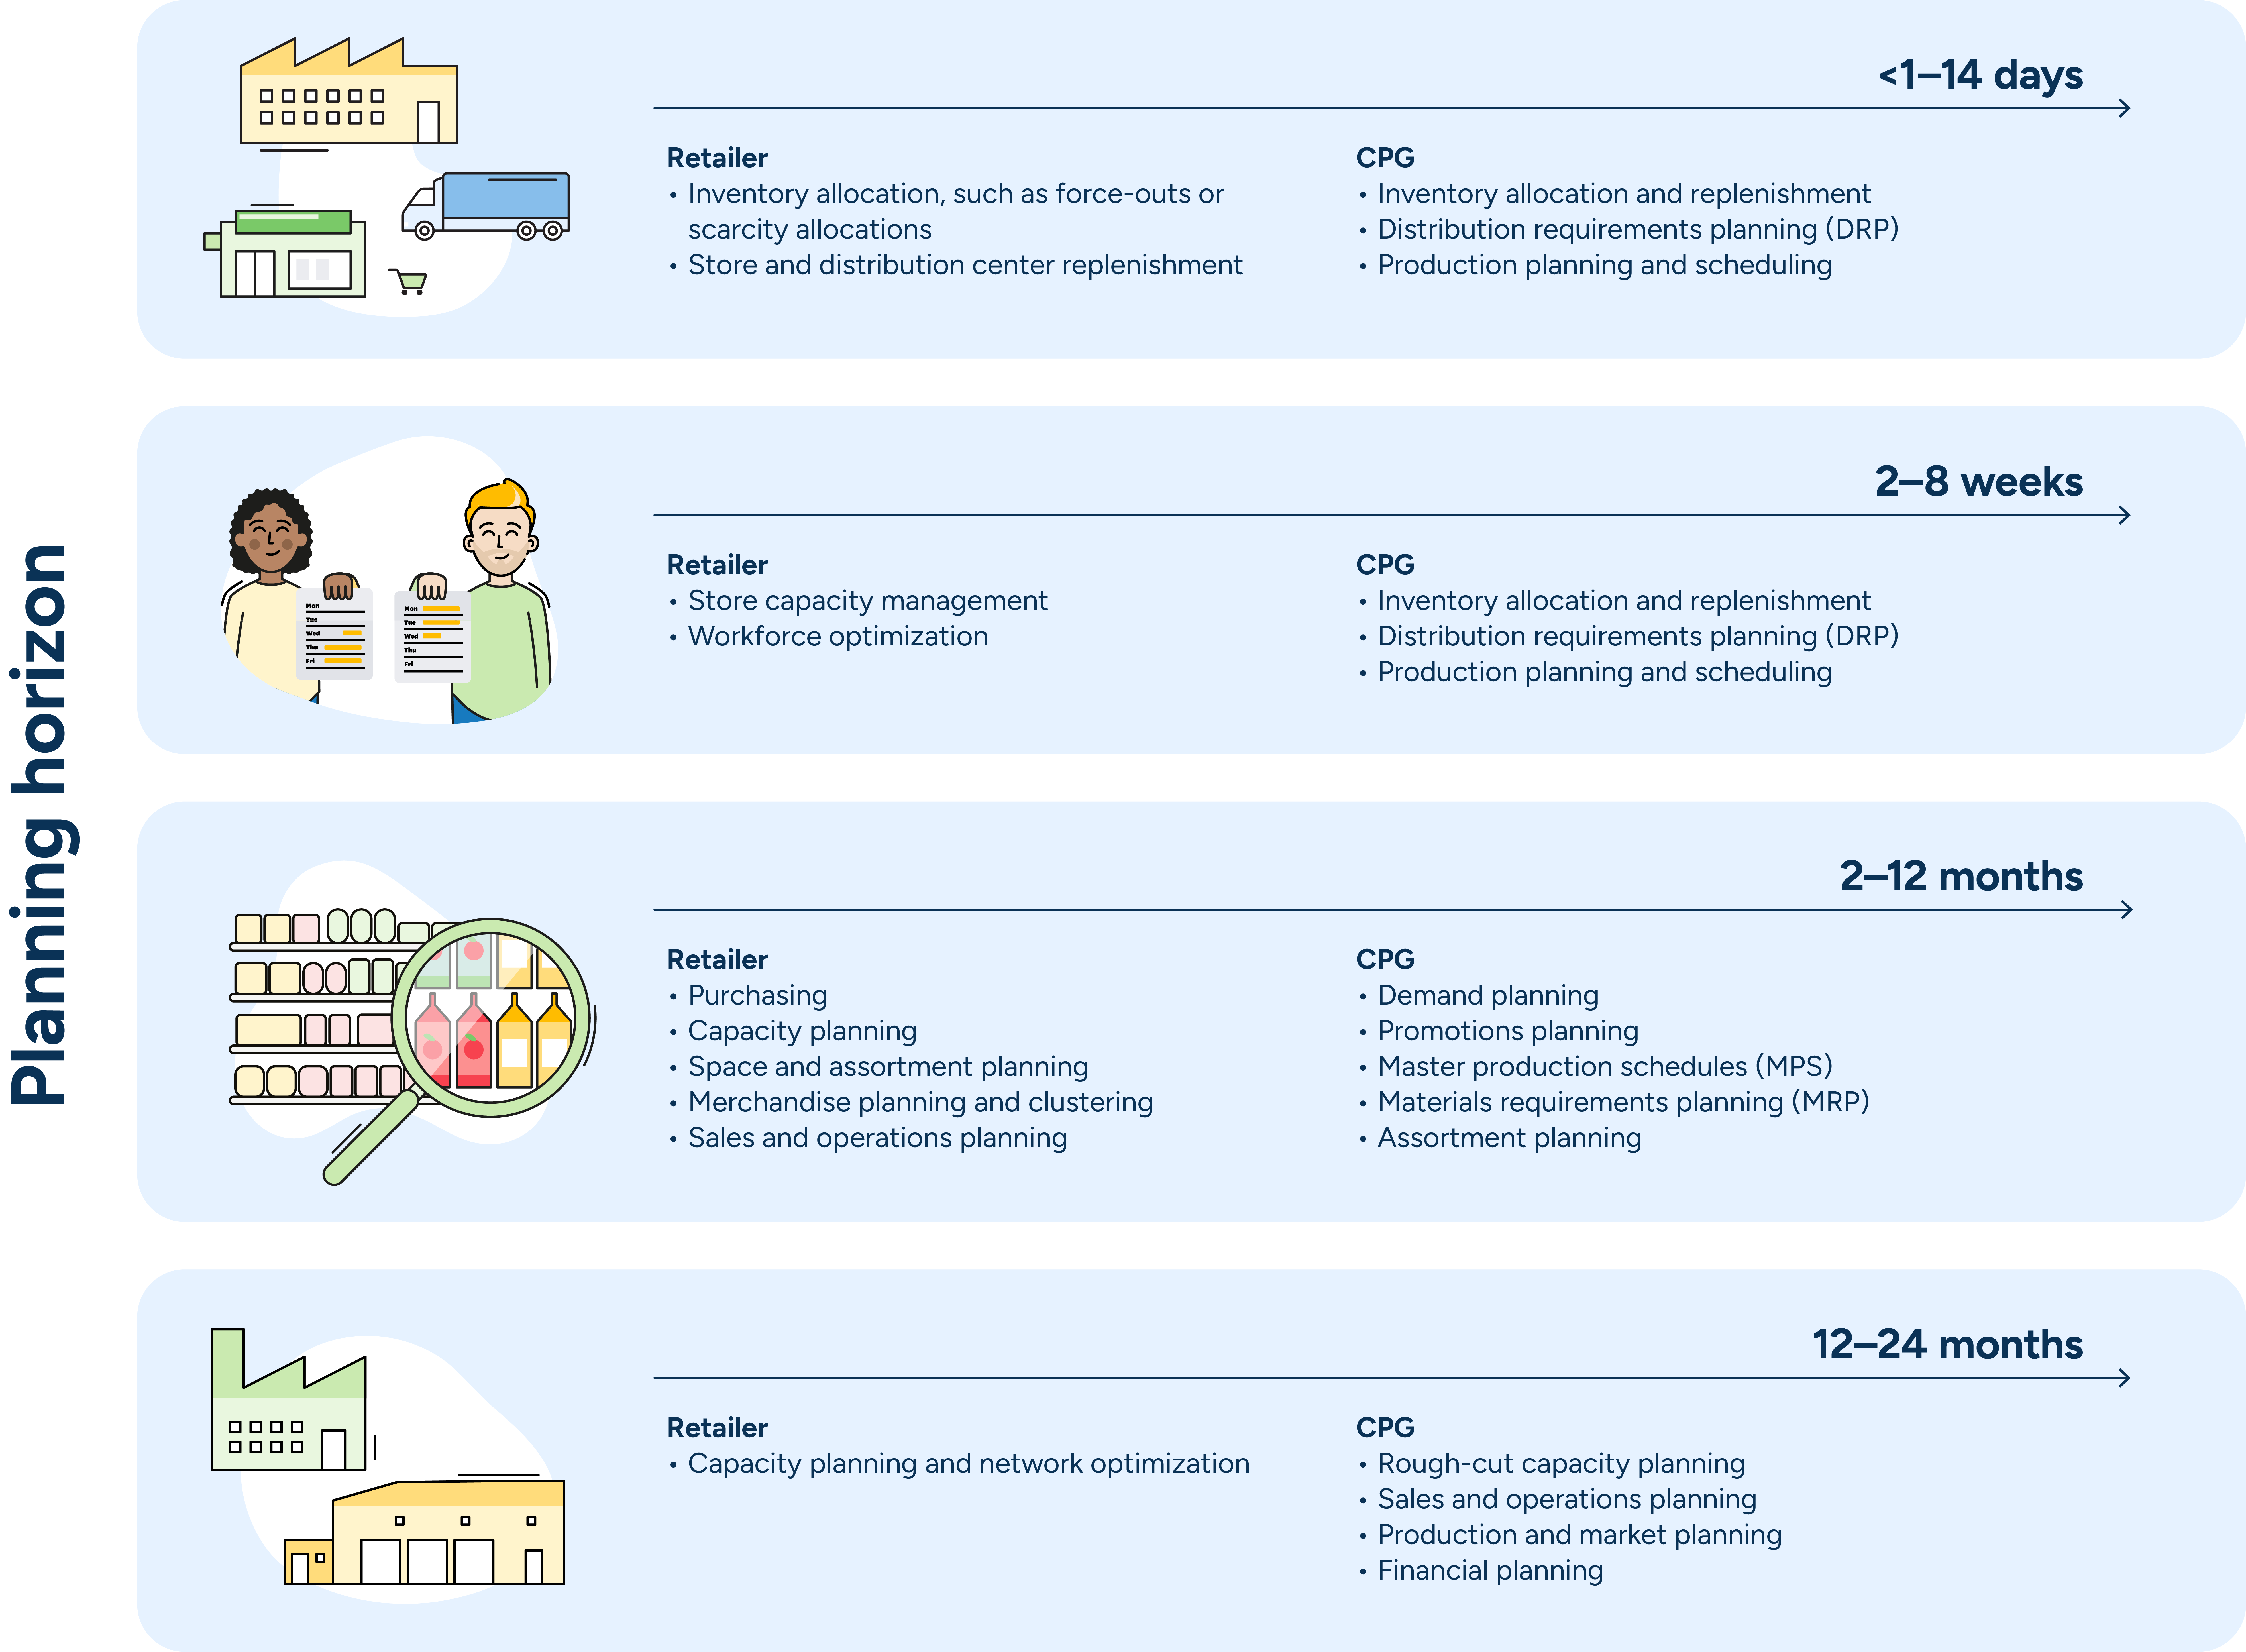 Illustration showing planning horizons and forecasting considerations for retailers and CPGs